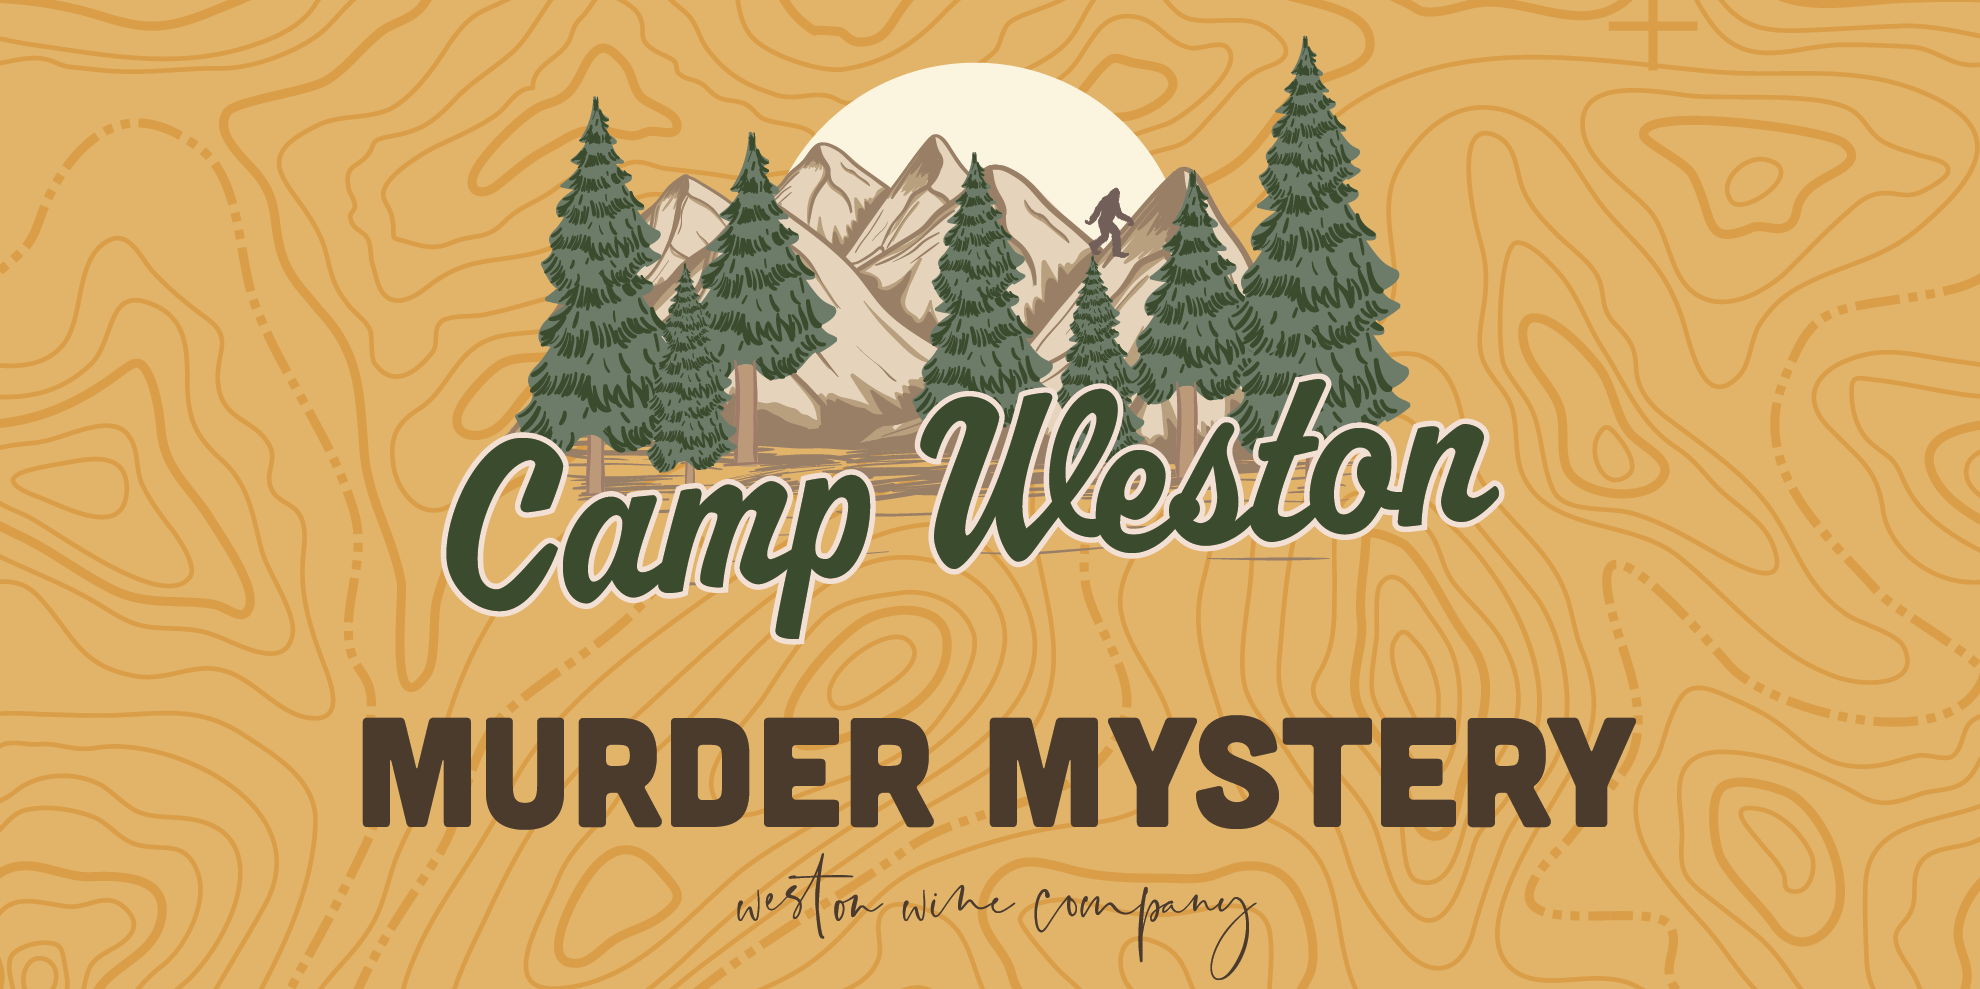 Camp Weston Killer Murder Mystery Party promotional image